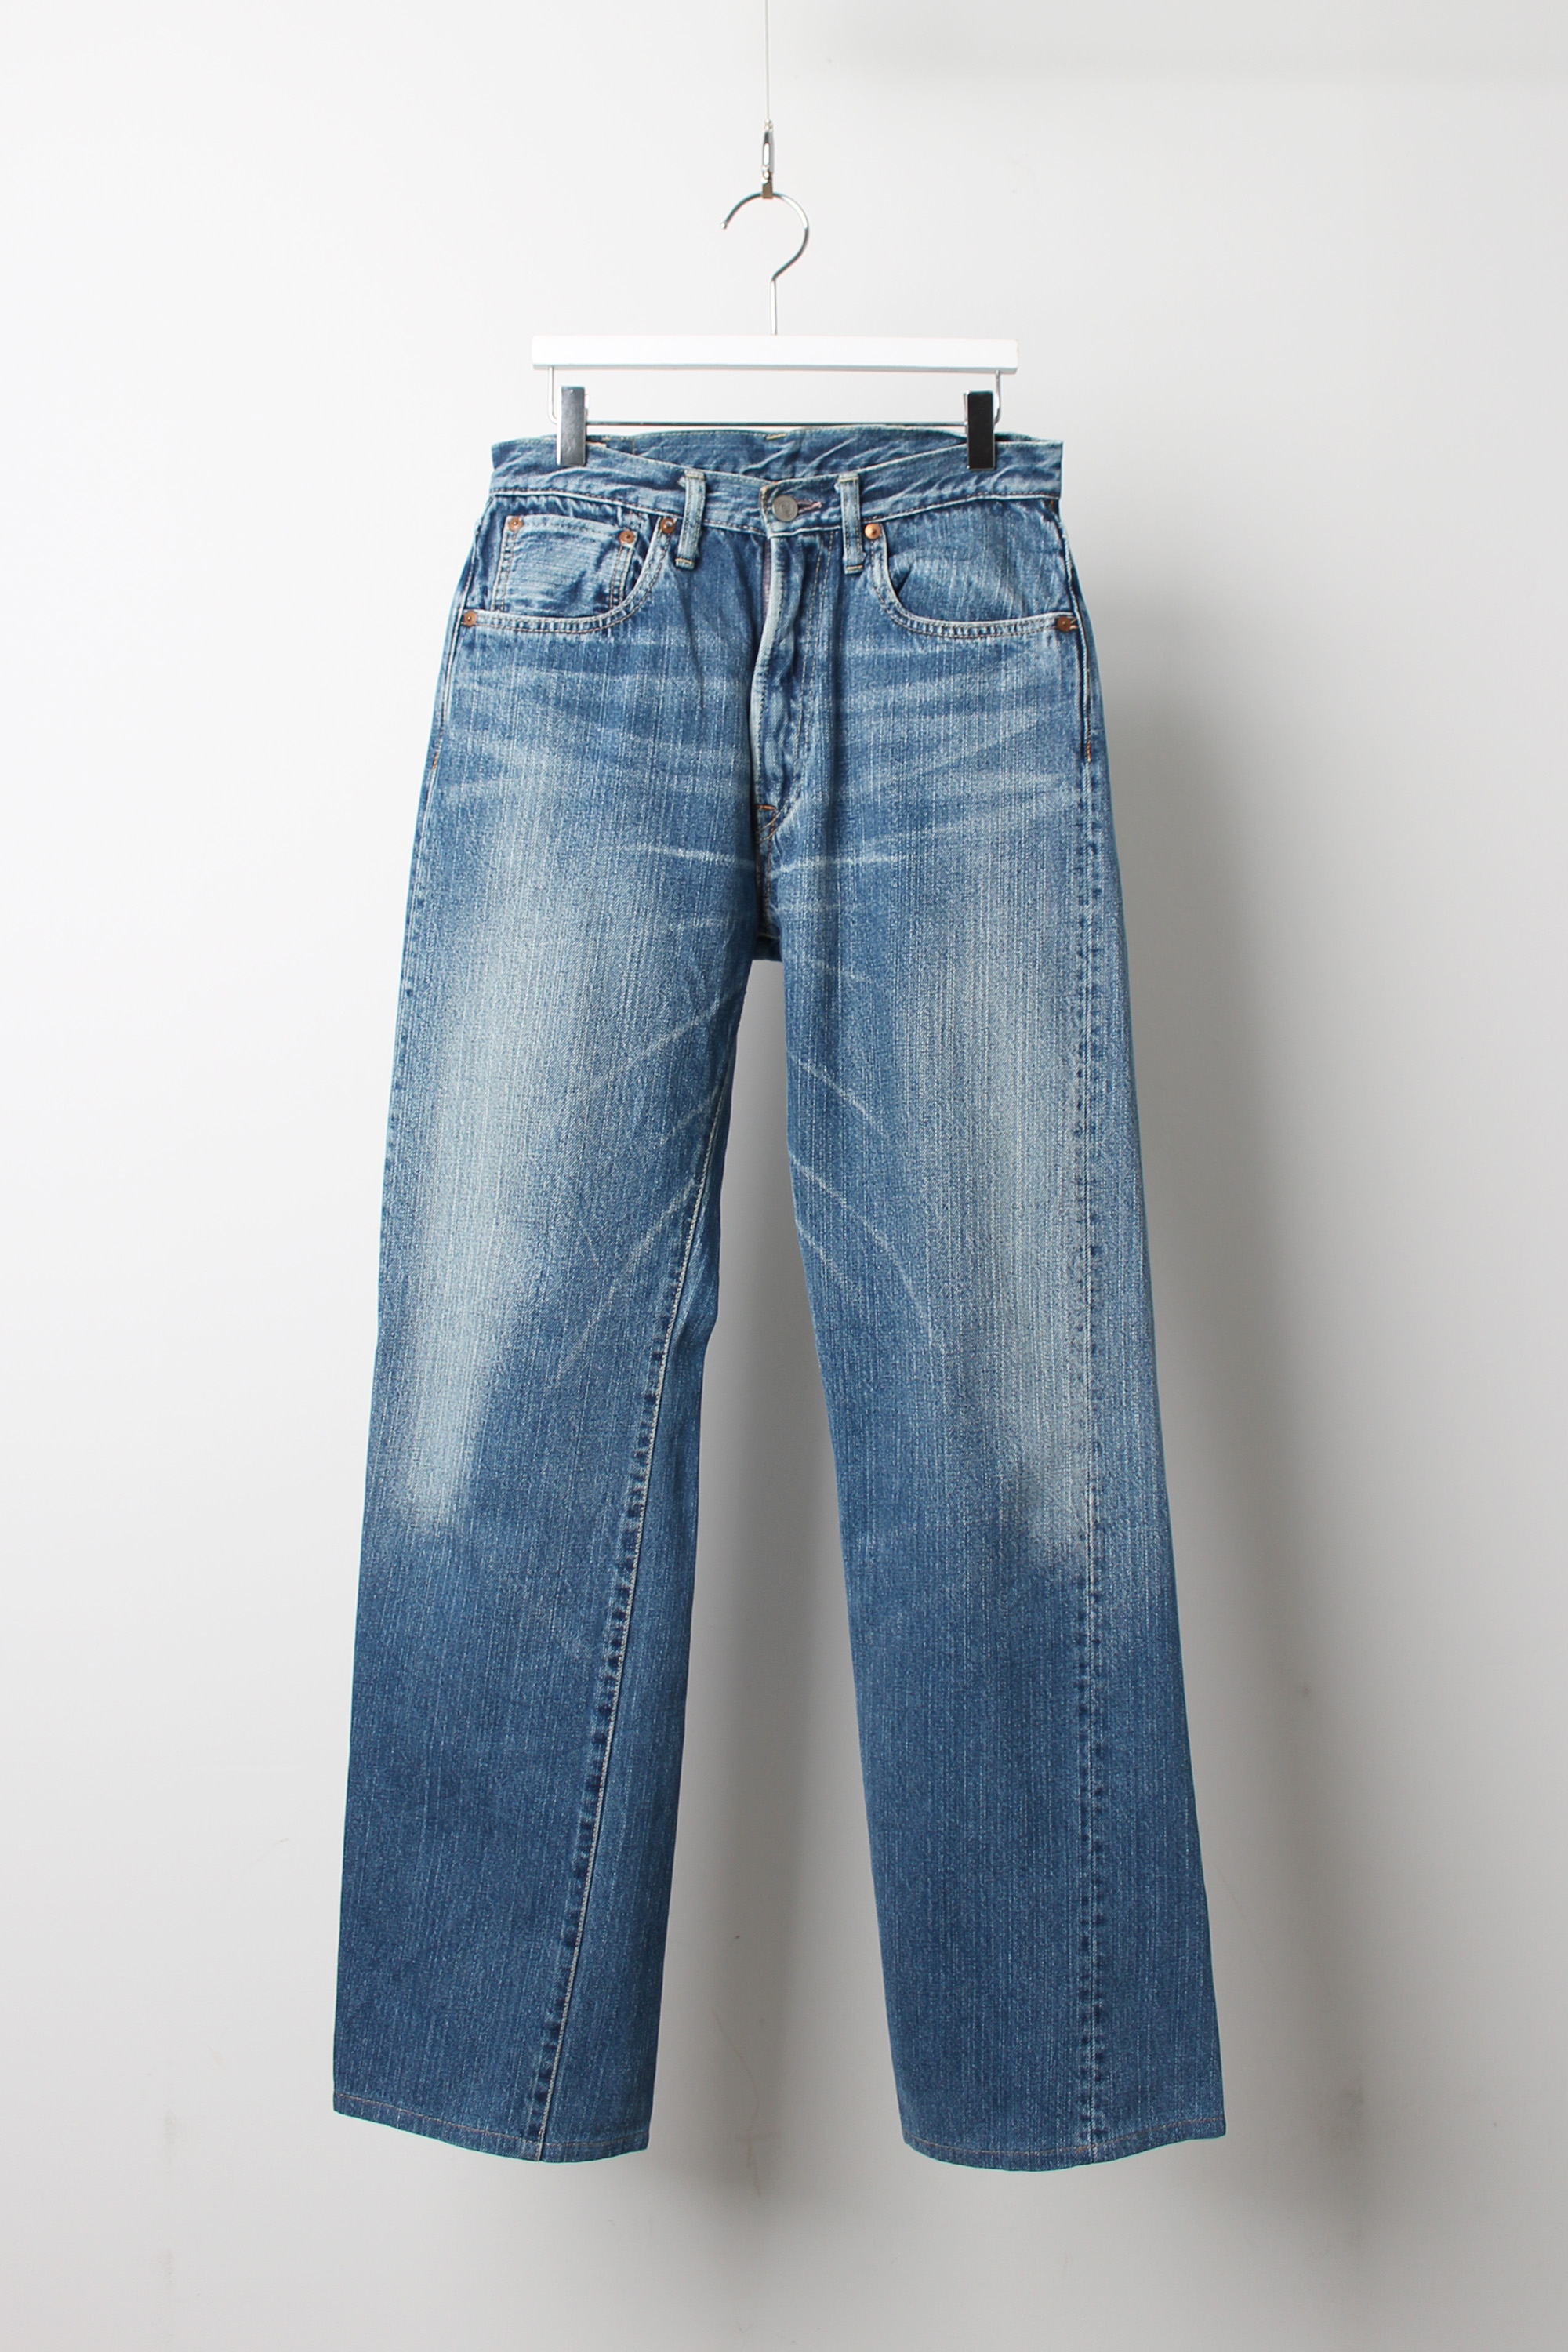 45R Washed Jean